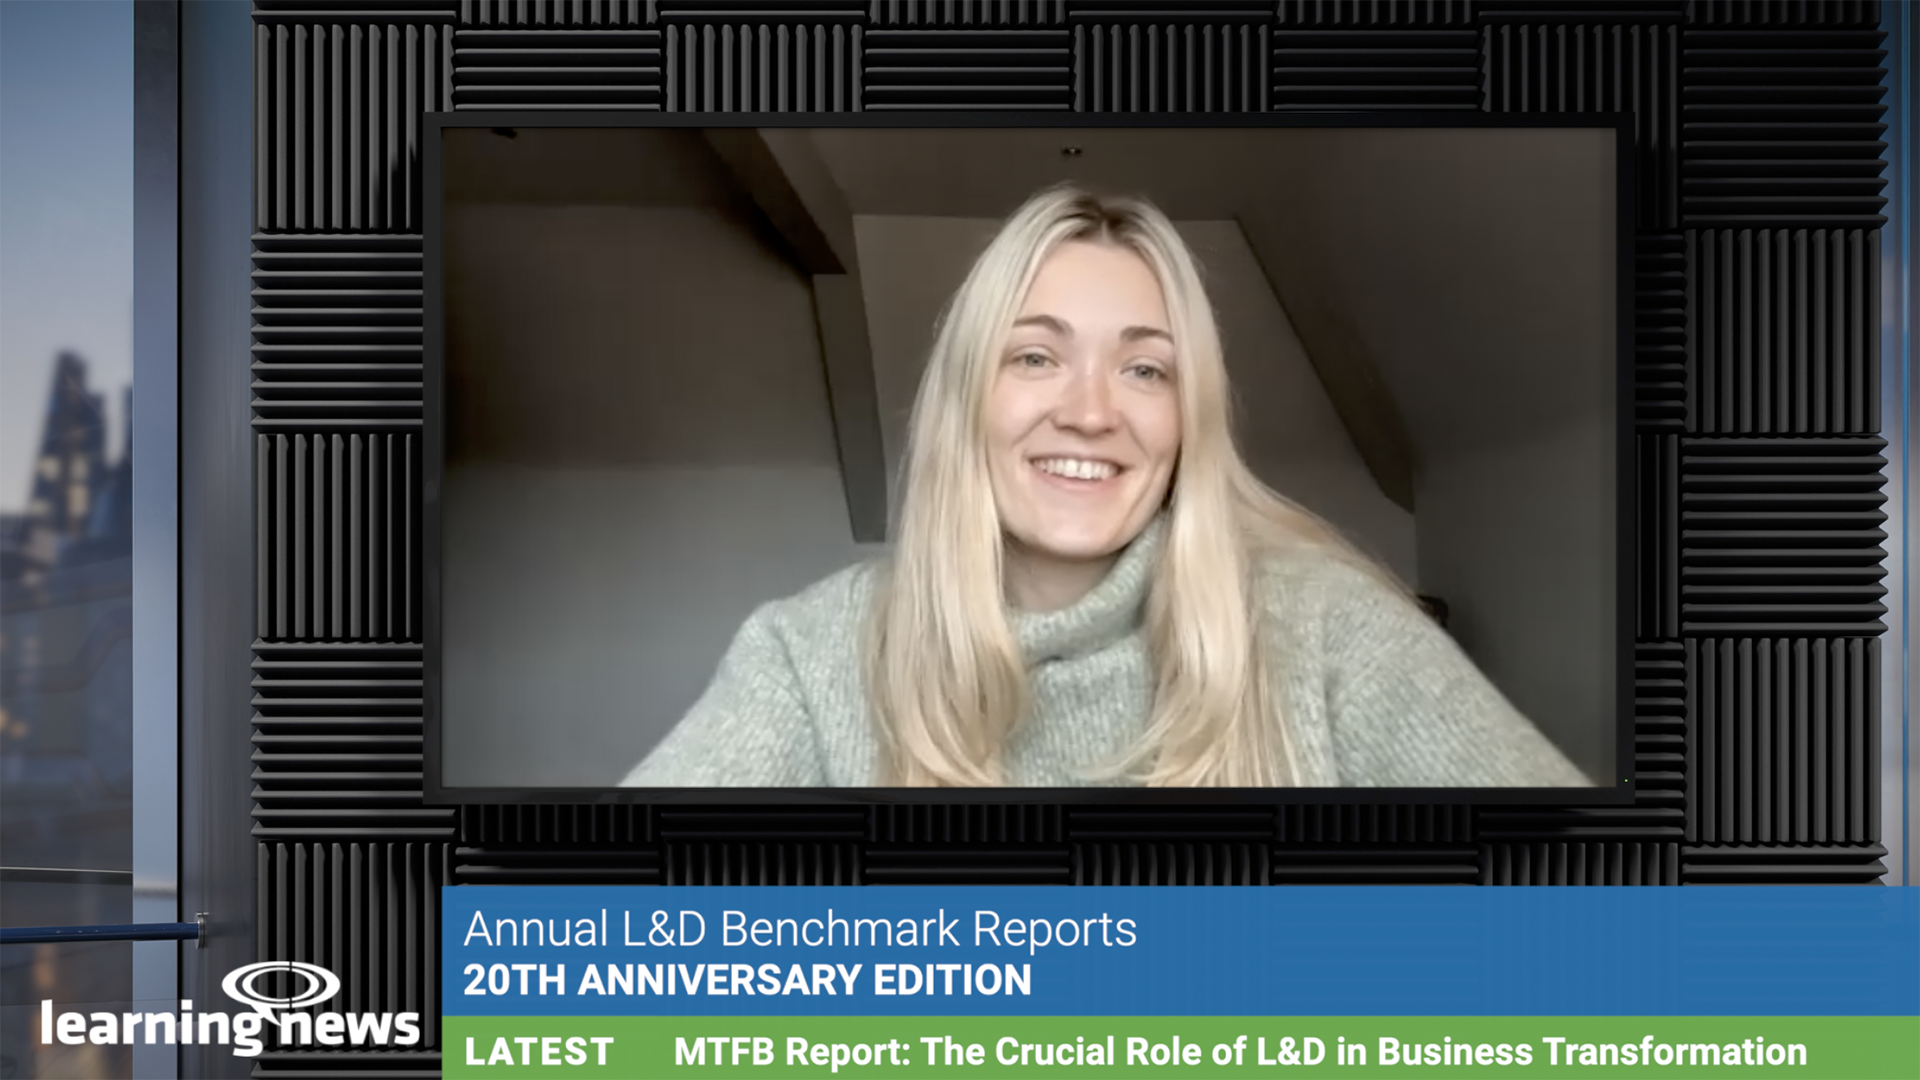 Anna Barnett worked on all three of the 20th Anniversary Benchmark Reports and joins Learning News to discuss L&D’s role helping business to tackle digitization, climate change and demographic shifts